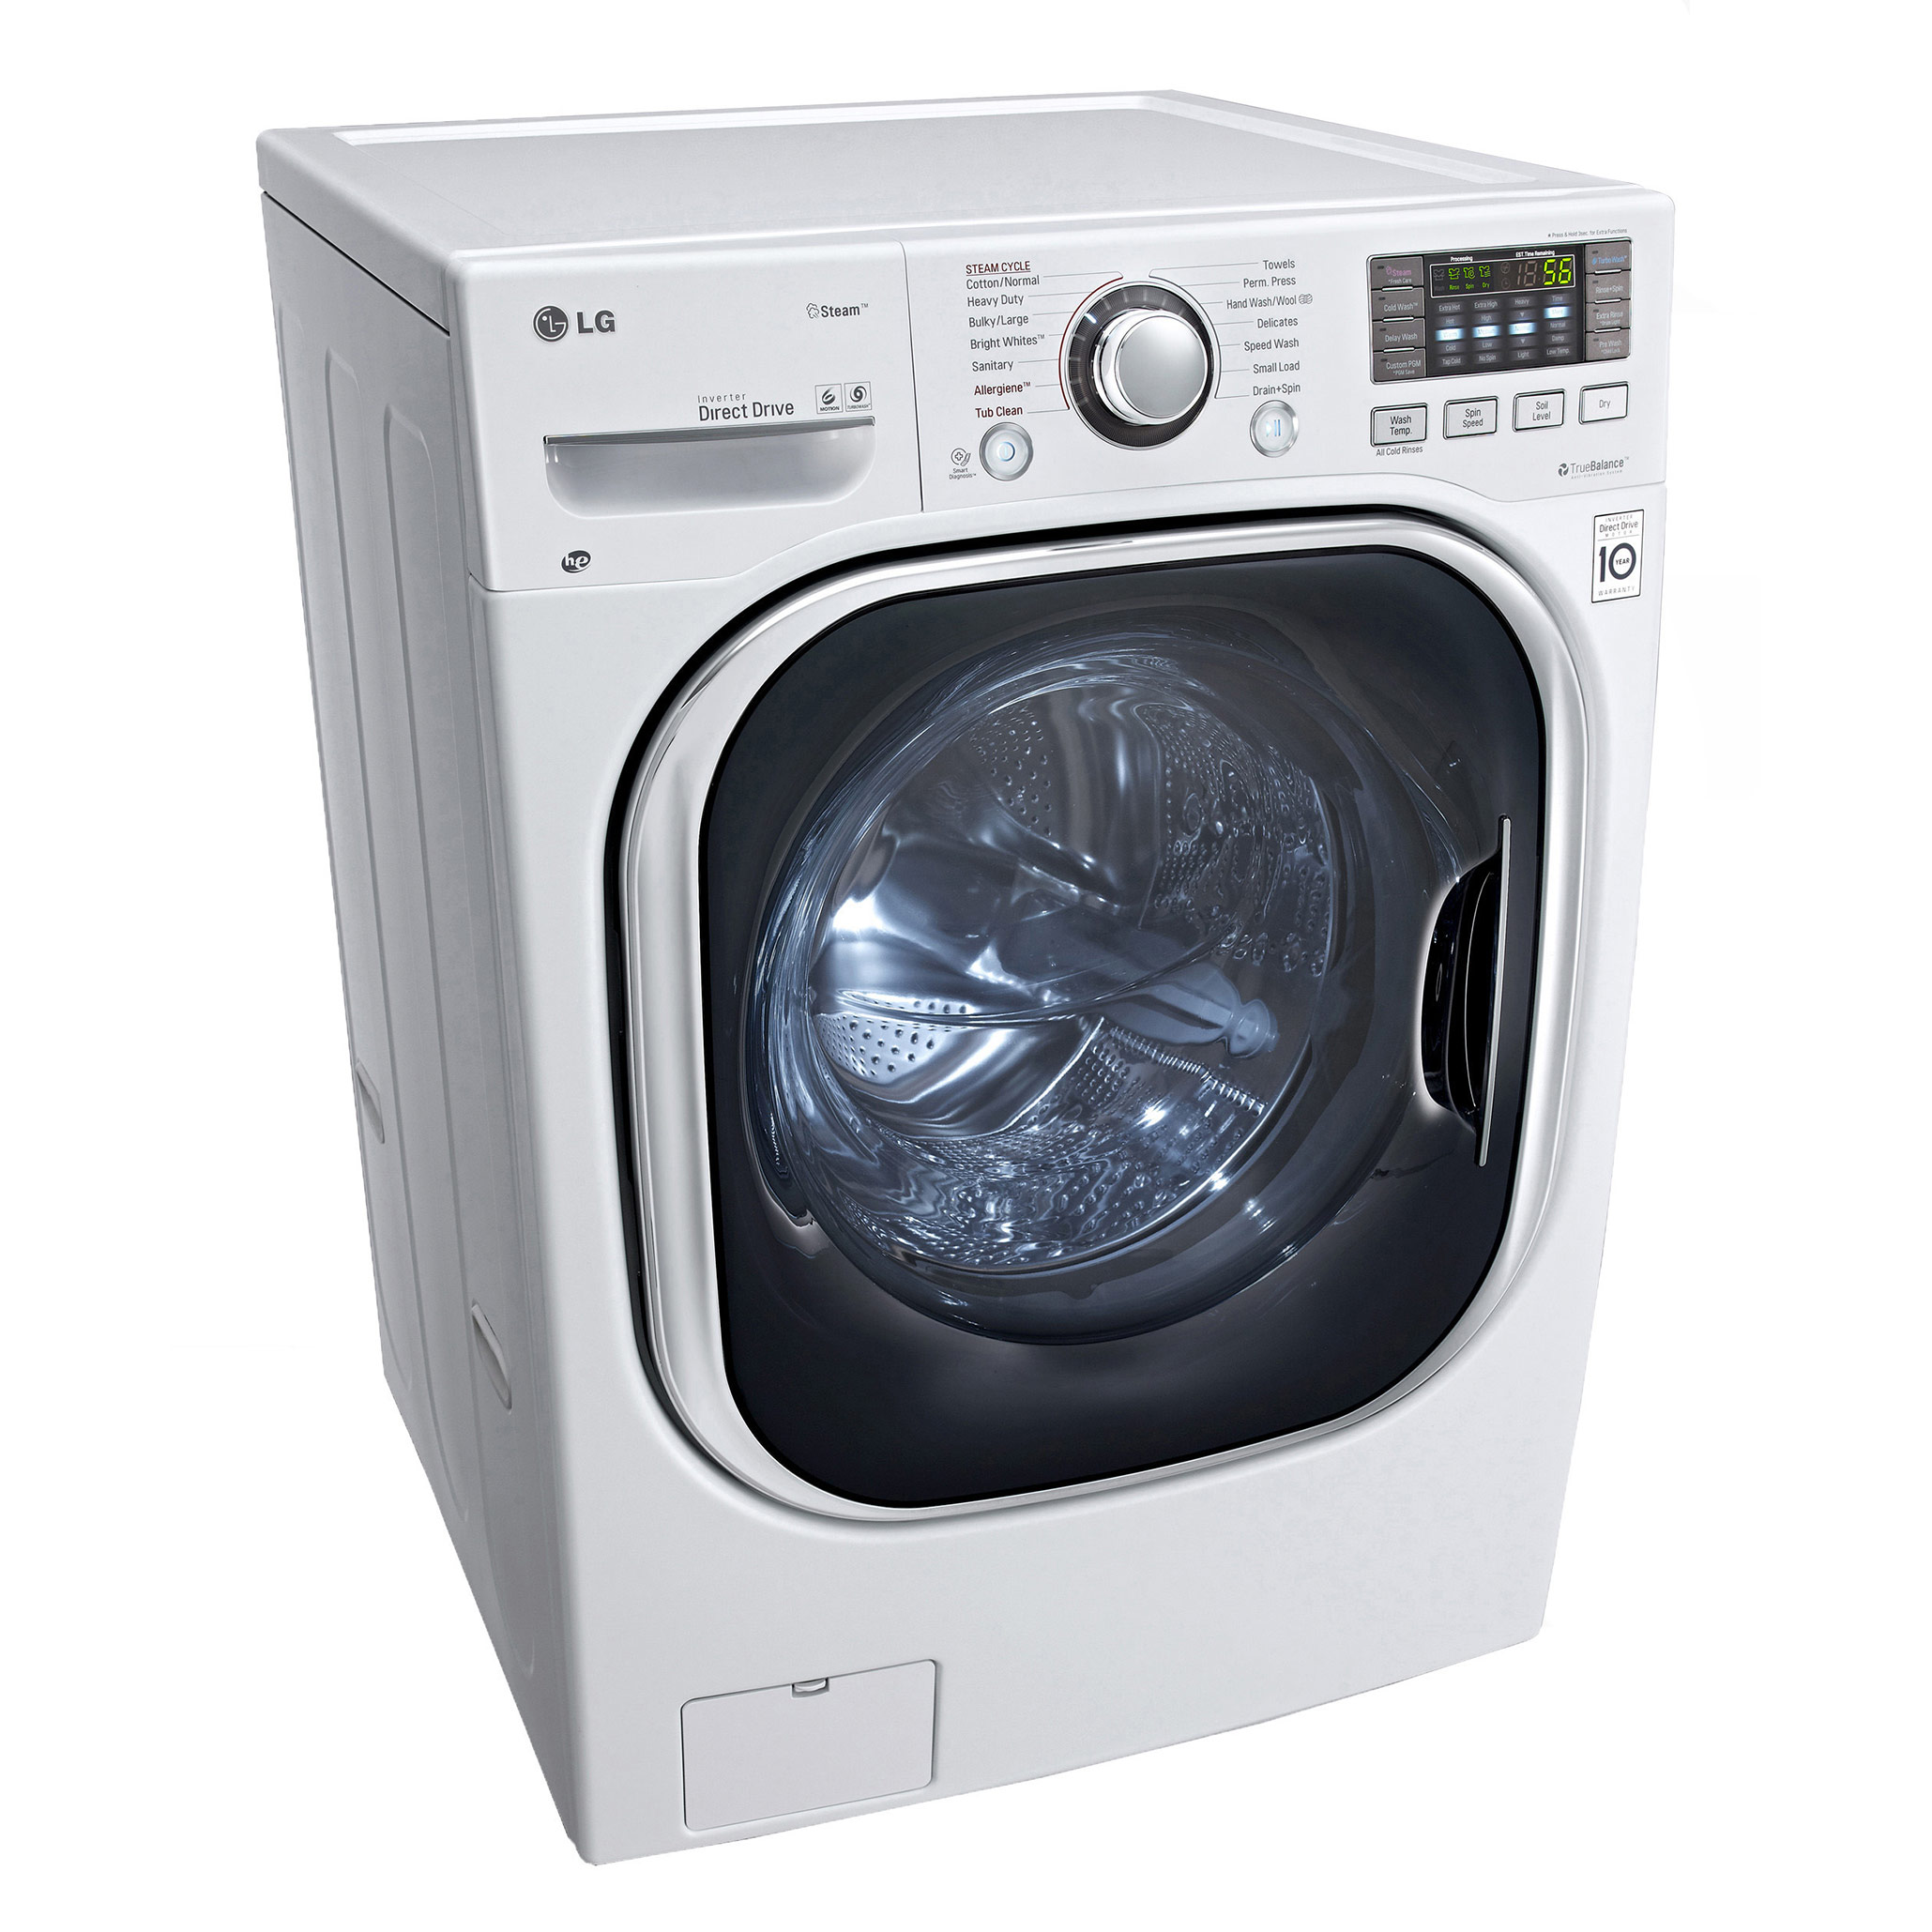 LG WM3997HWA | All in One Washer Dryer Combo | LGWasherDryer.com All In One Washer Dryer Combo Reviews